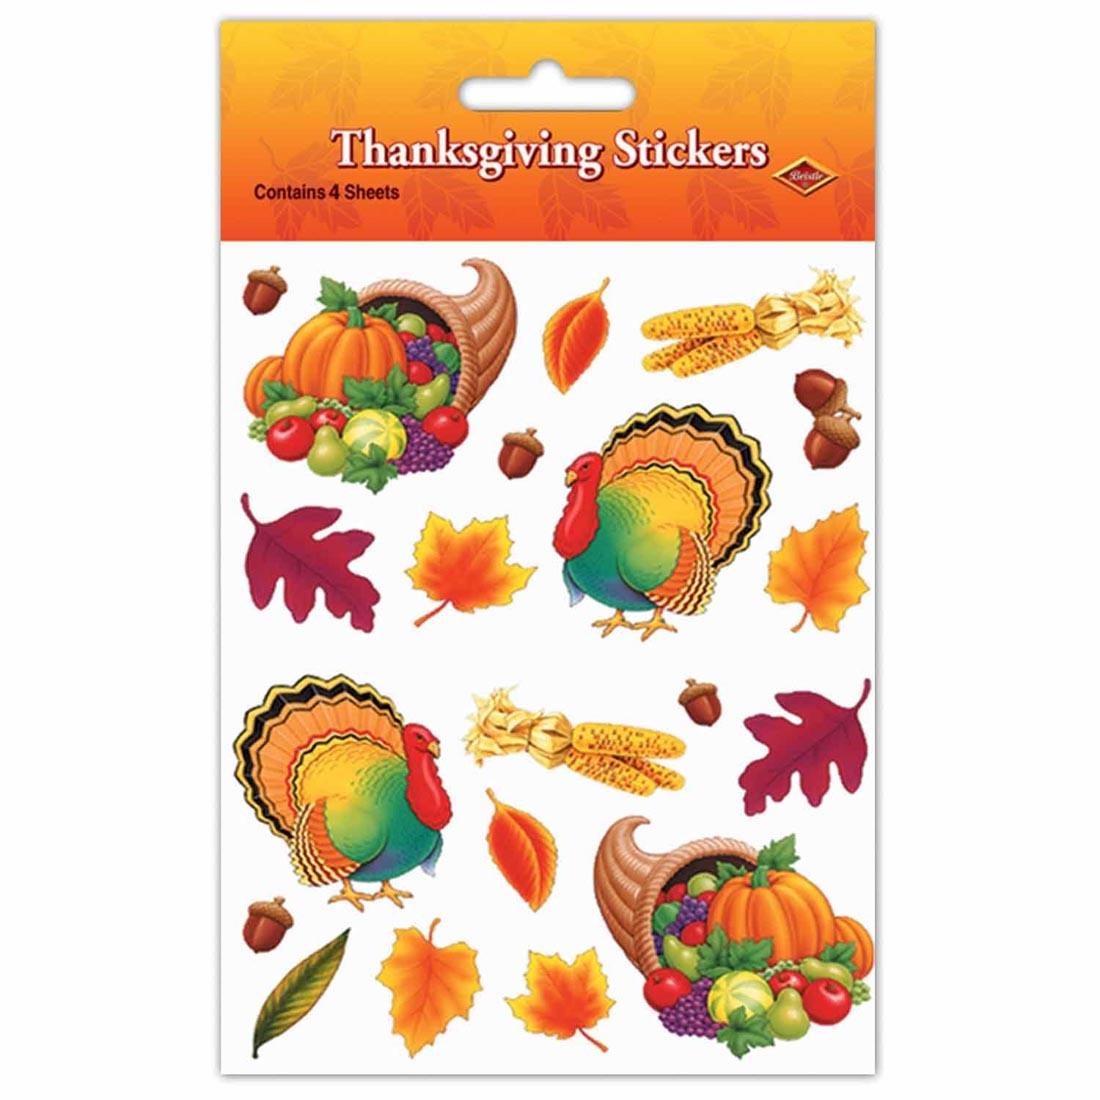 Thanksgiving Stickers By Beistle Company